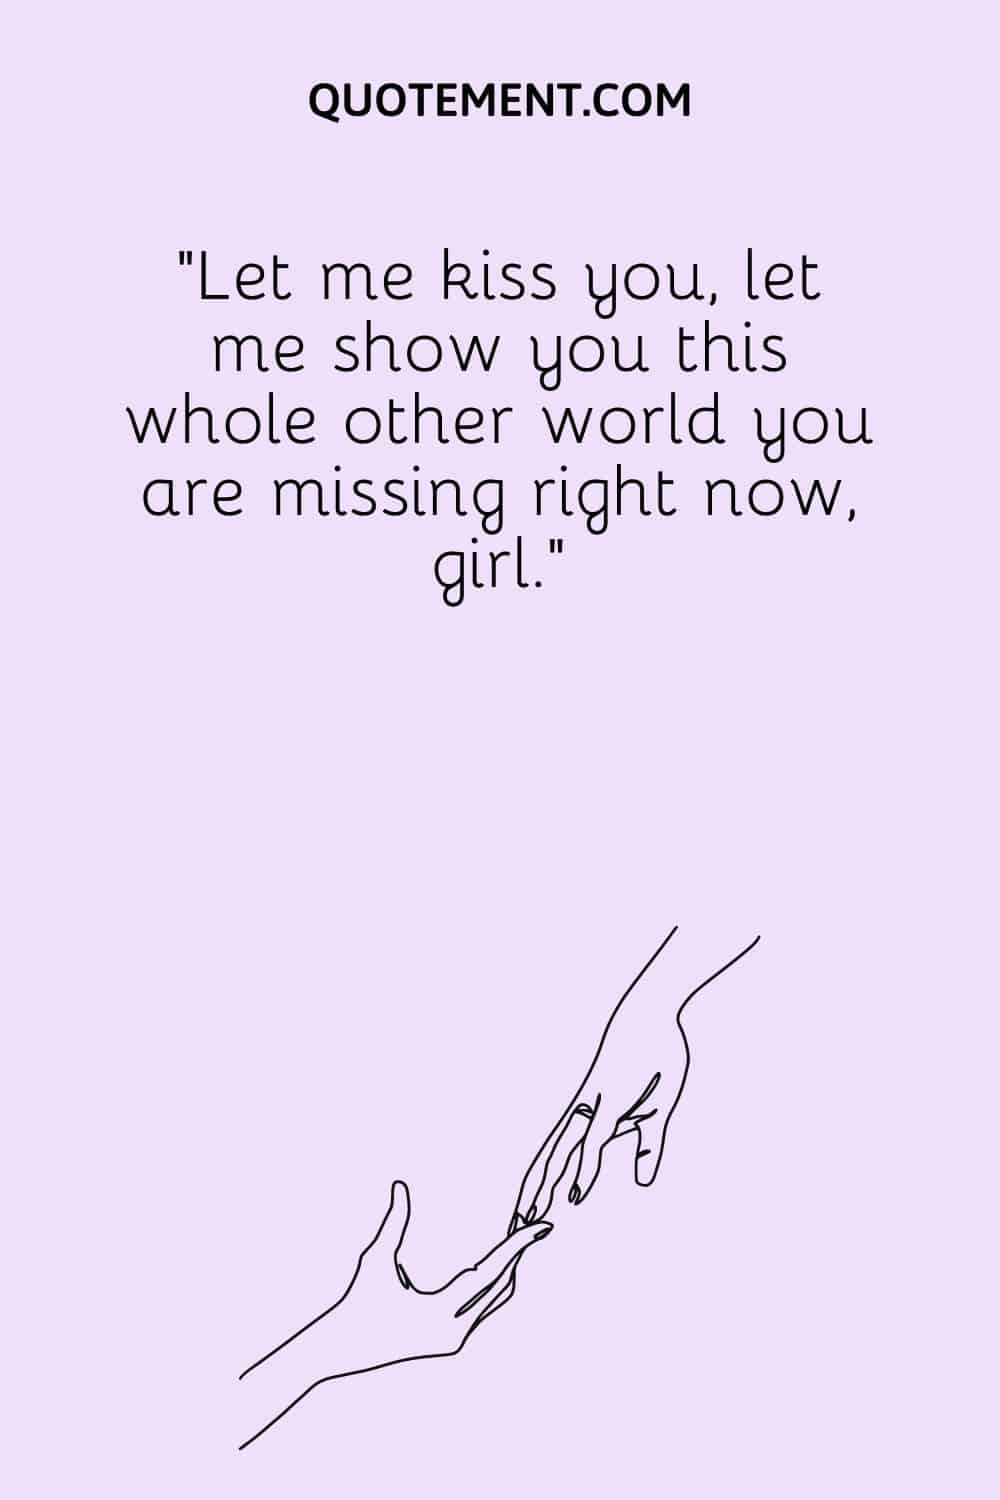 Let me kiss you, let me show you this whole other world you are missing right now, girl.